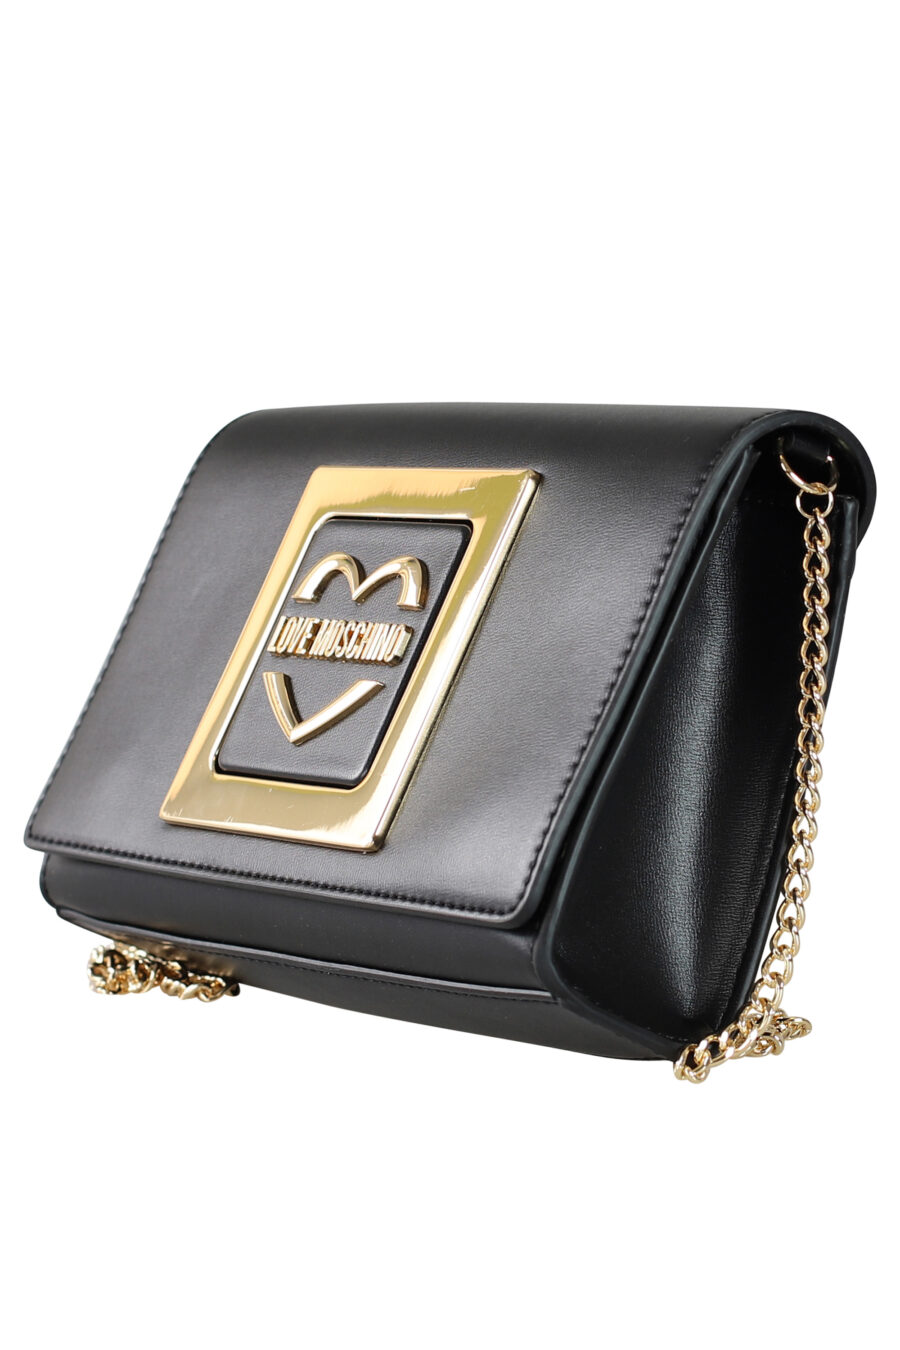 Black shoulder bag with gold maxilogo and chain - 8059965990439 2